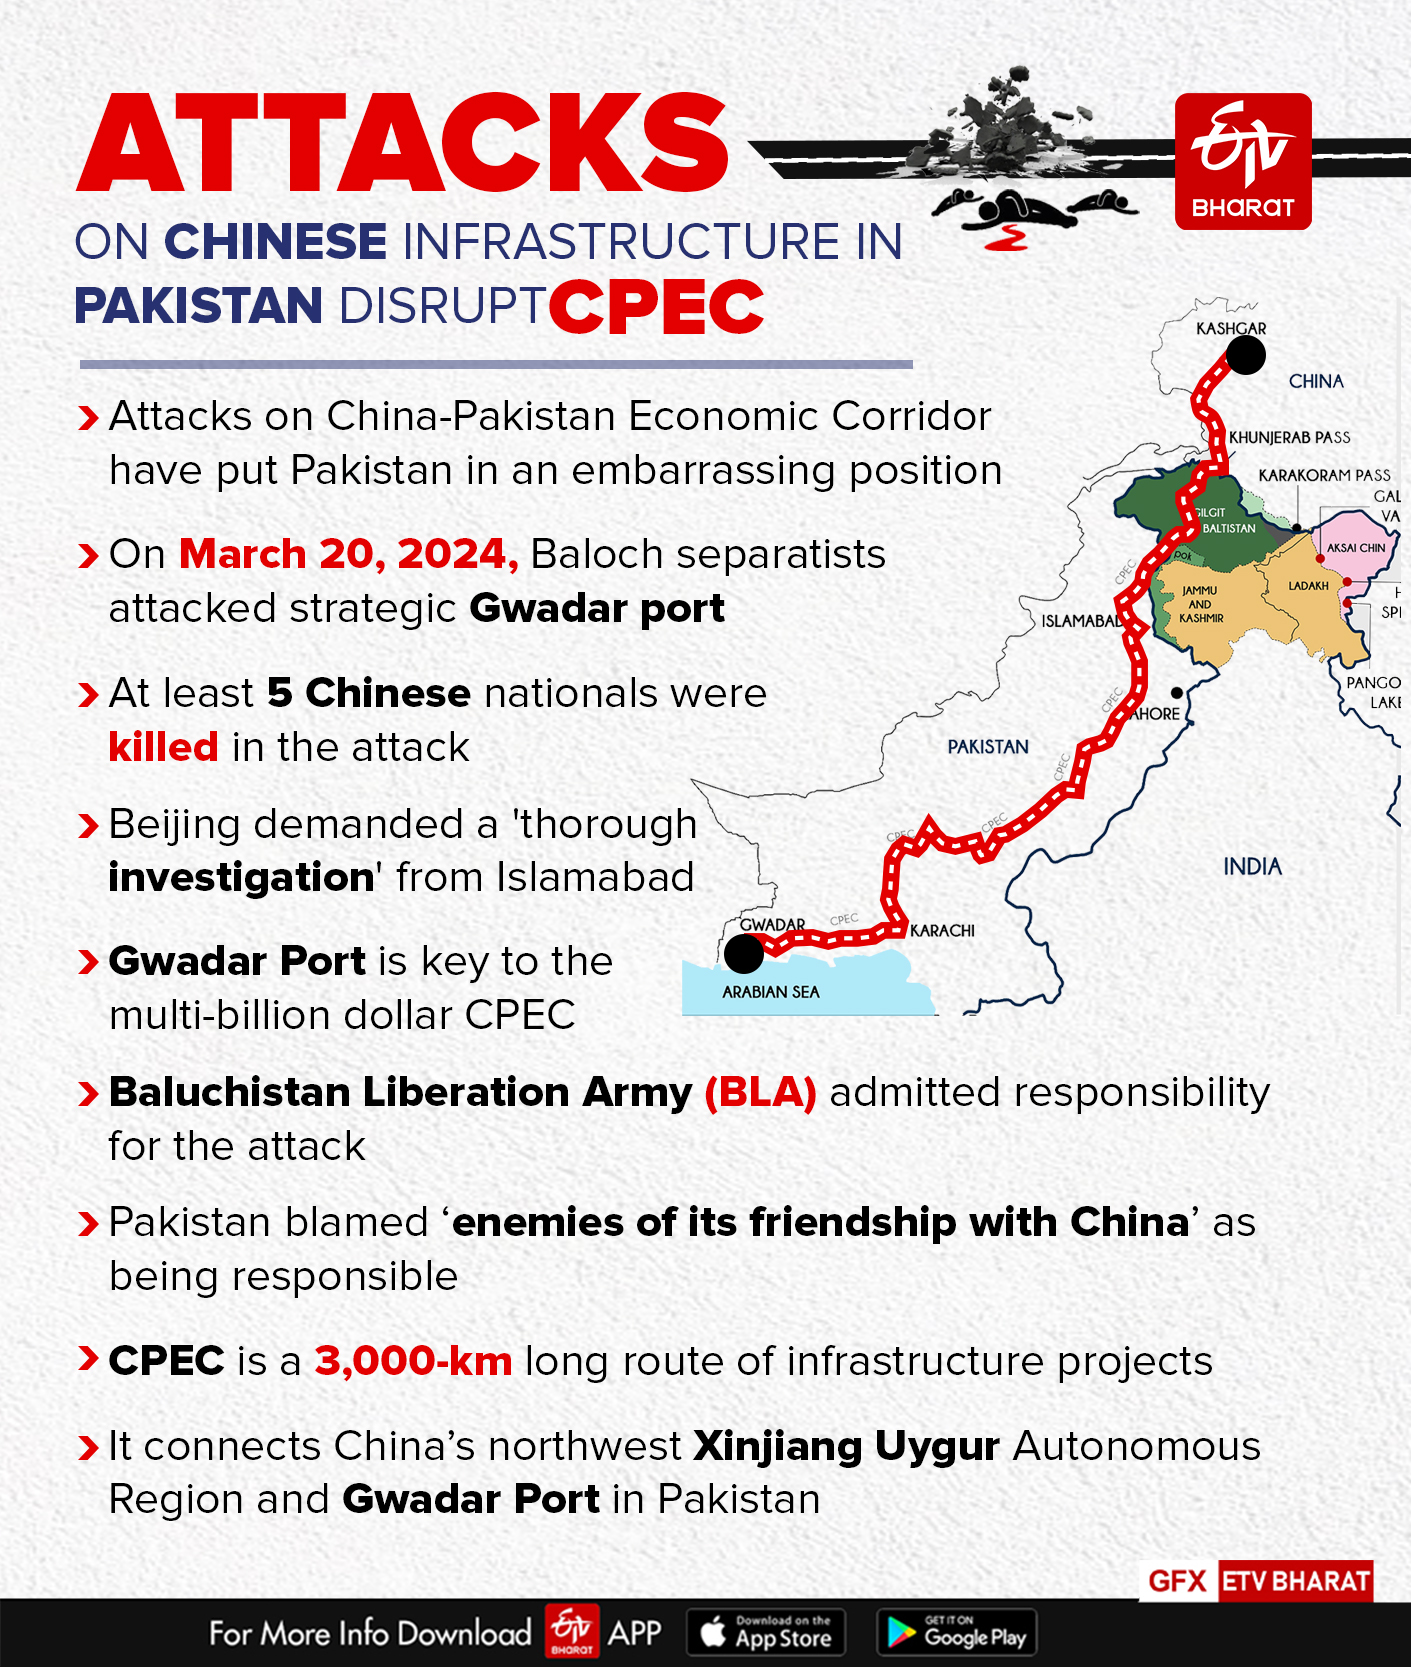 ATTACKS ON CPEC IN PAKISTAN